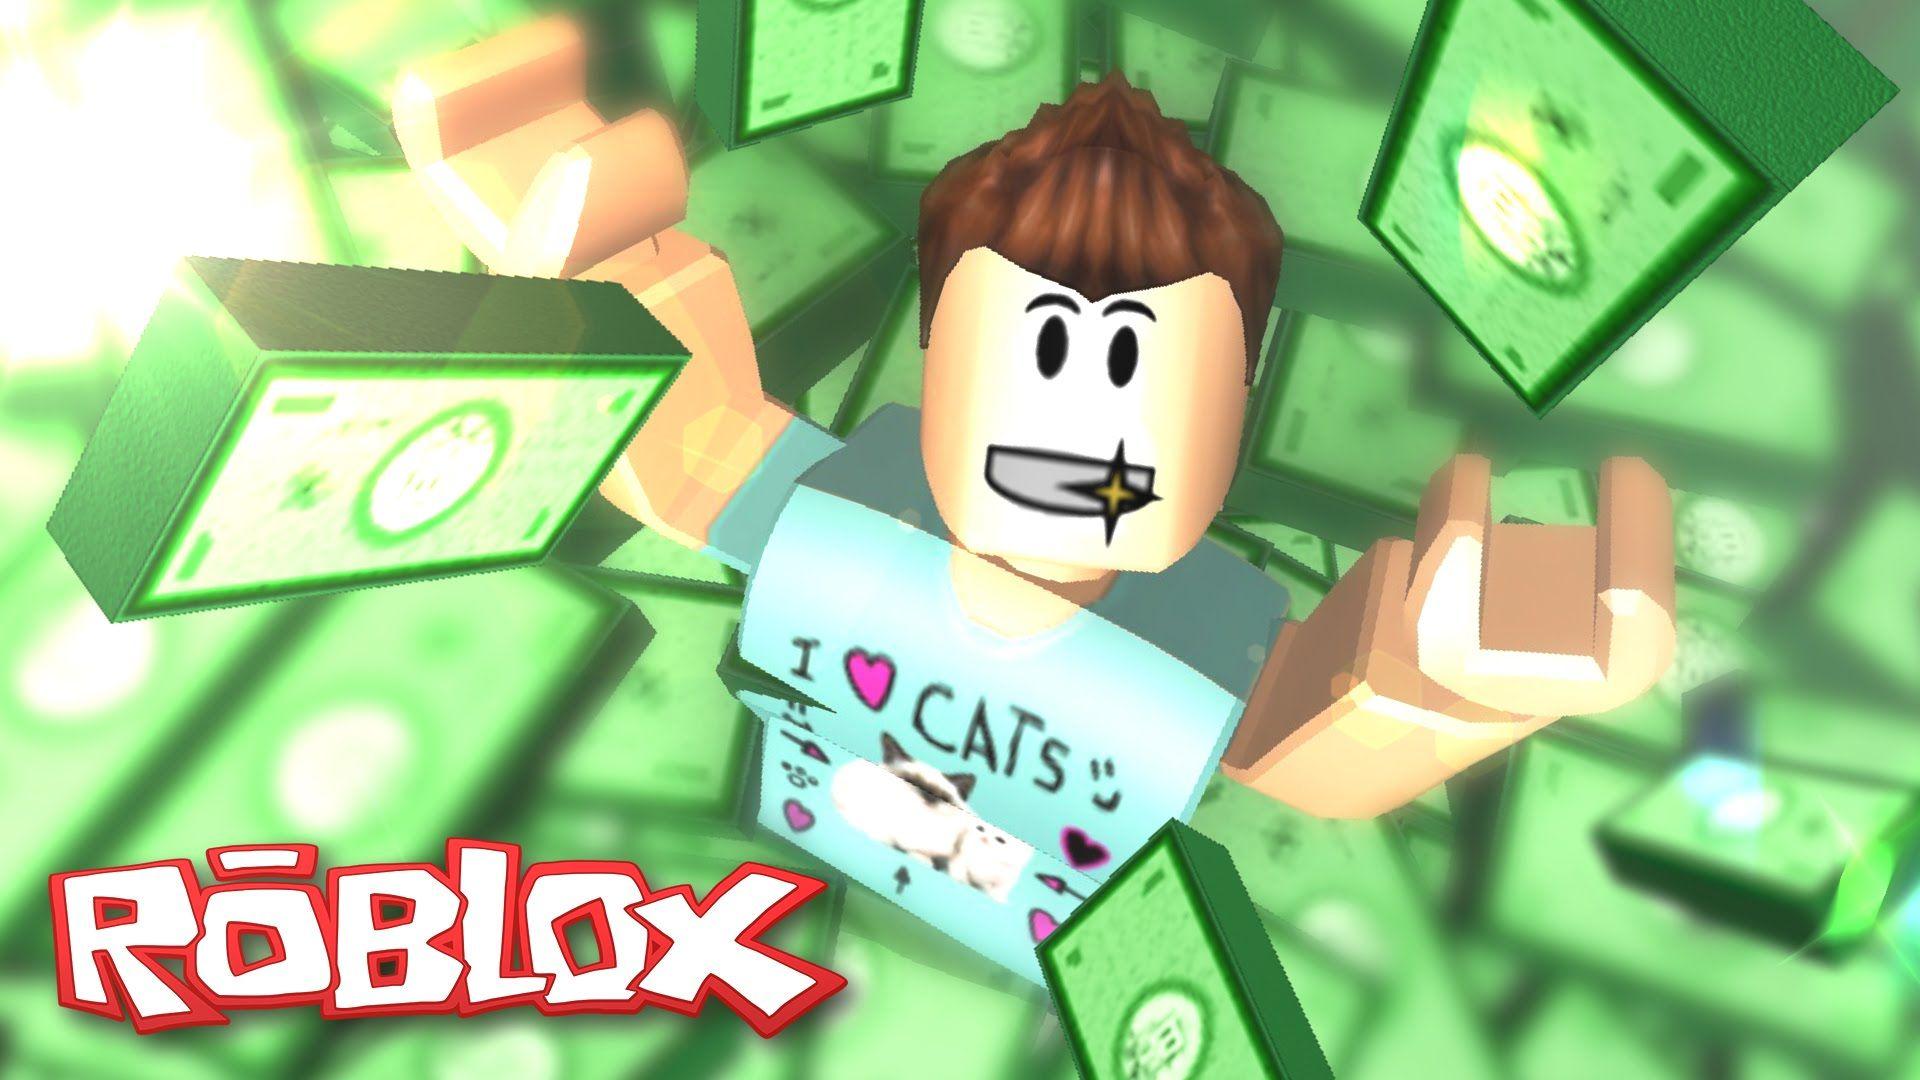 Roblox Game Ultra HD Wallpapers - Wallpaper Cave